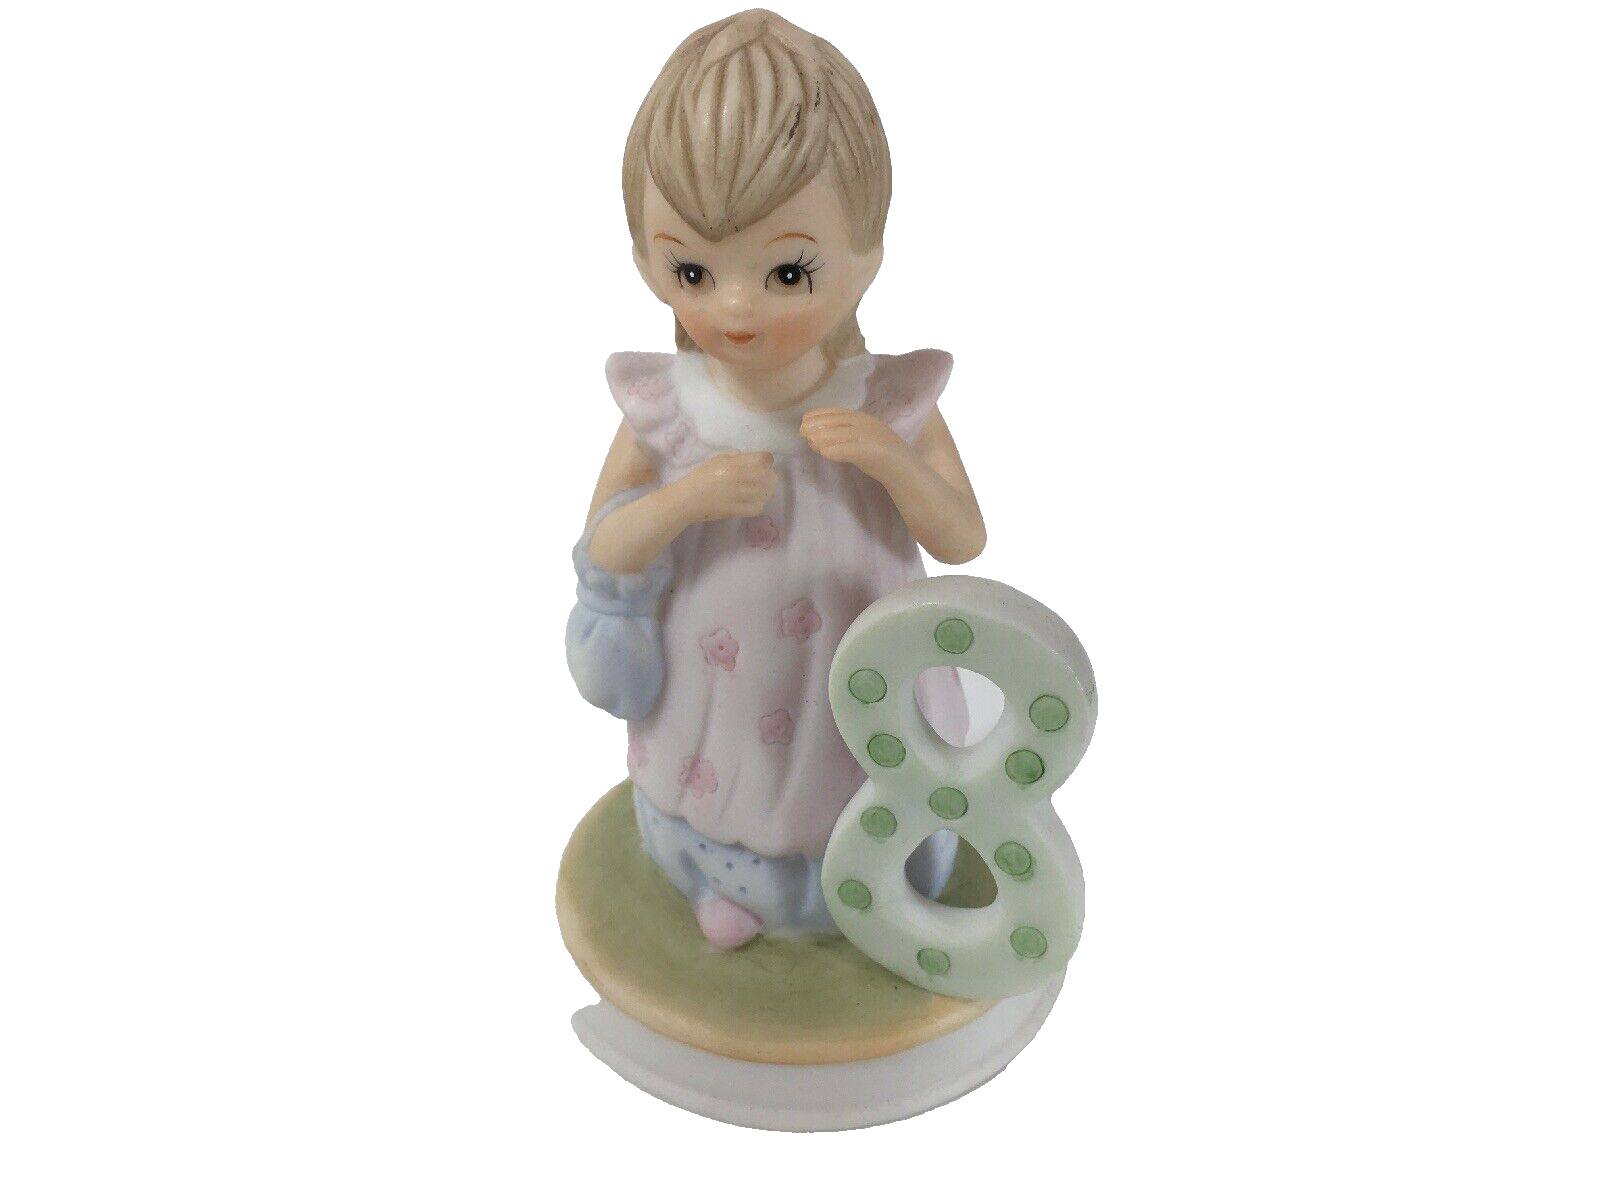 Lefton Age 8 The Christopher Collection Birthday Girl Figurine Vintage 03448H - $25.98